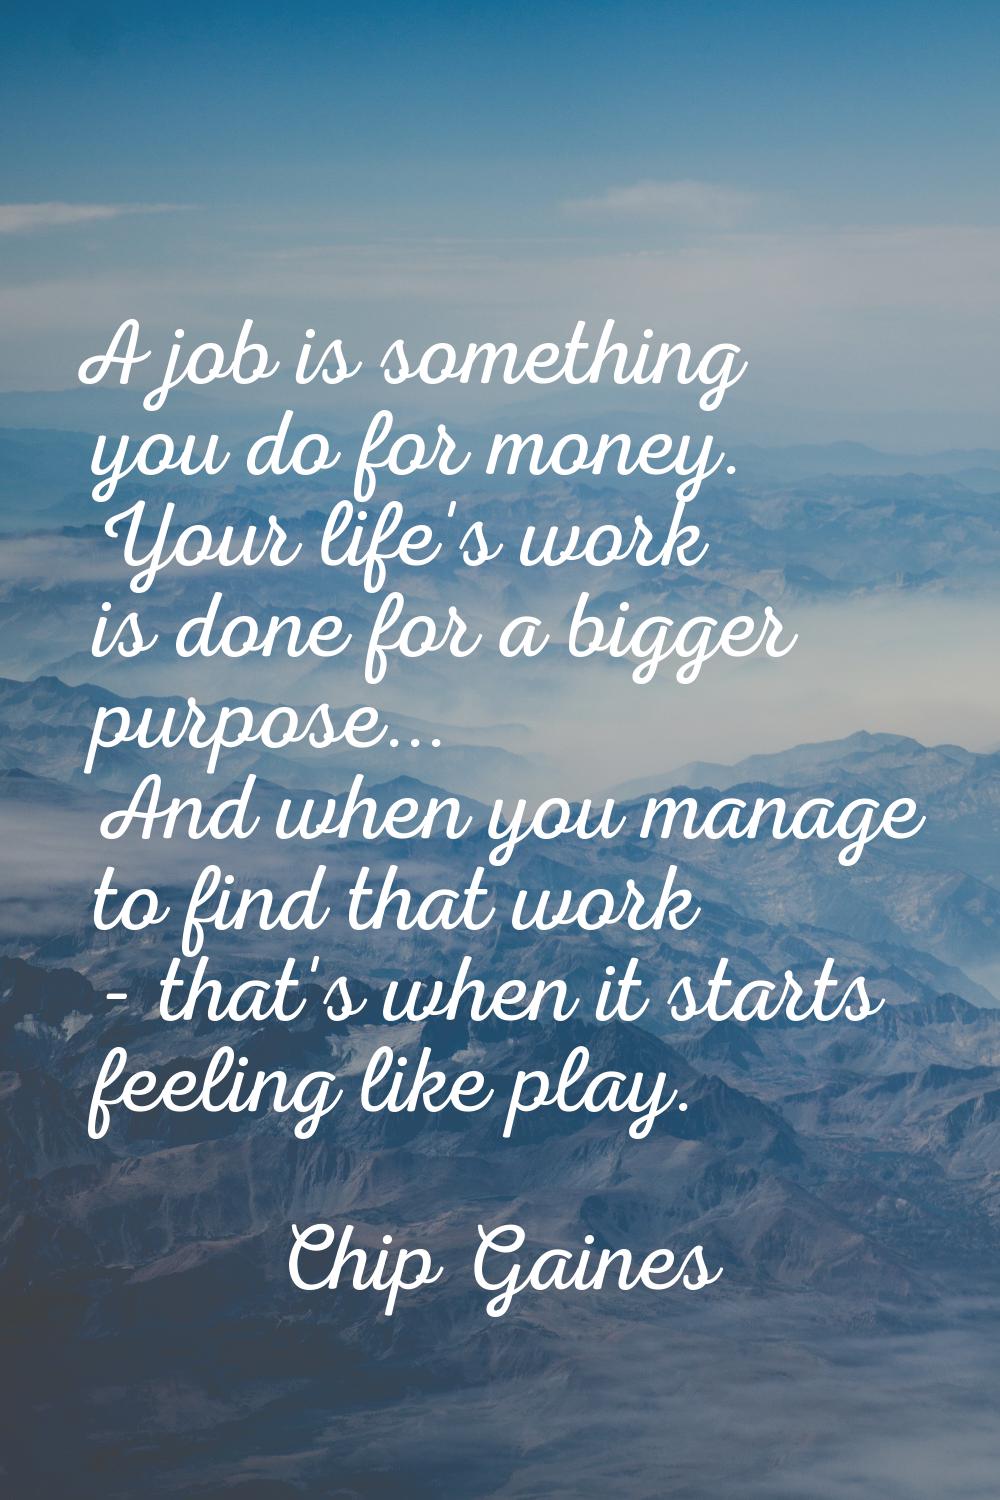 A job is something you do for money. Your life's work is done for a bigger purpose... And when you 